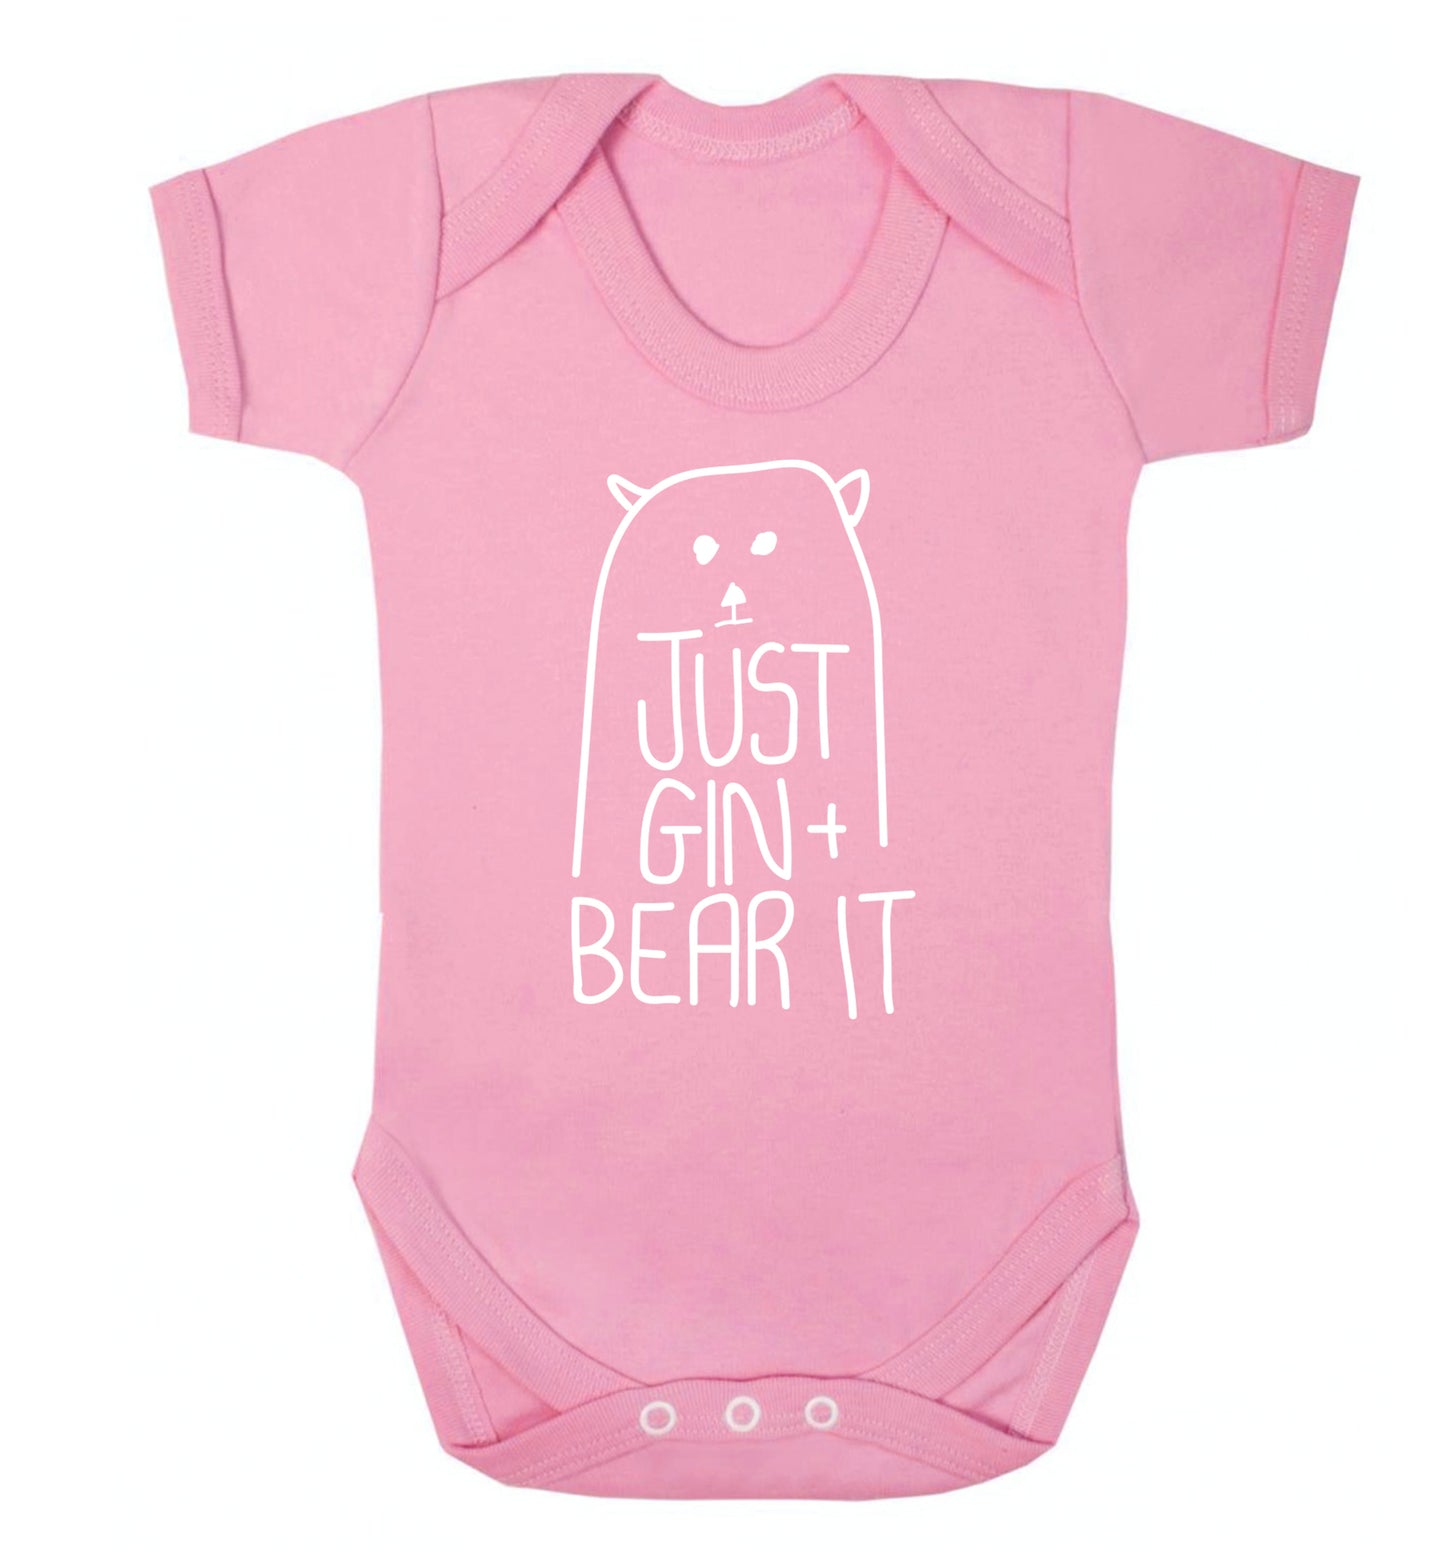 Just gin and bear it Baby Vest pale pink 18-24 months